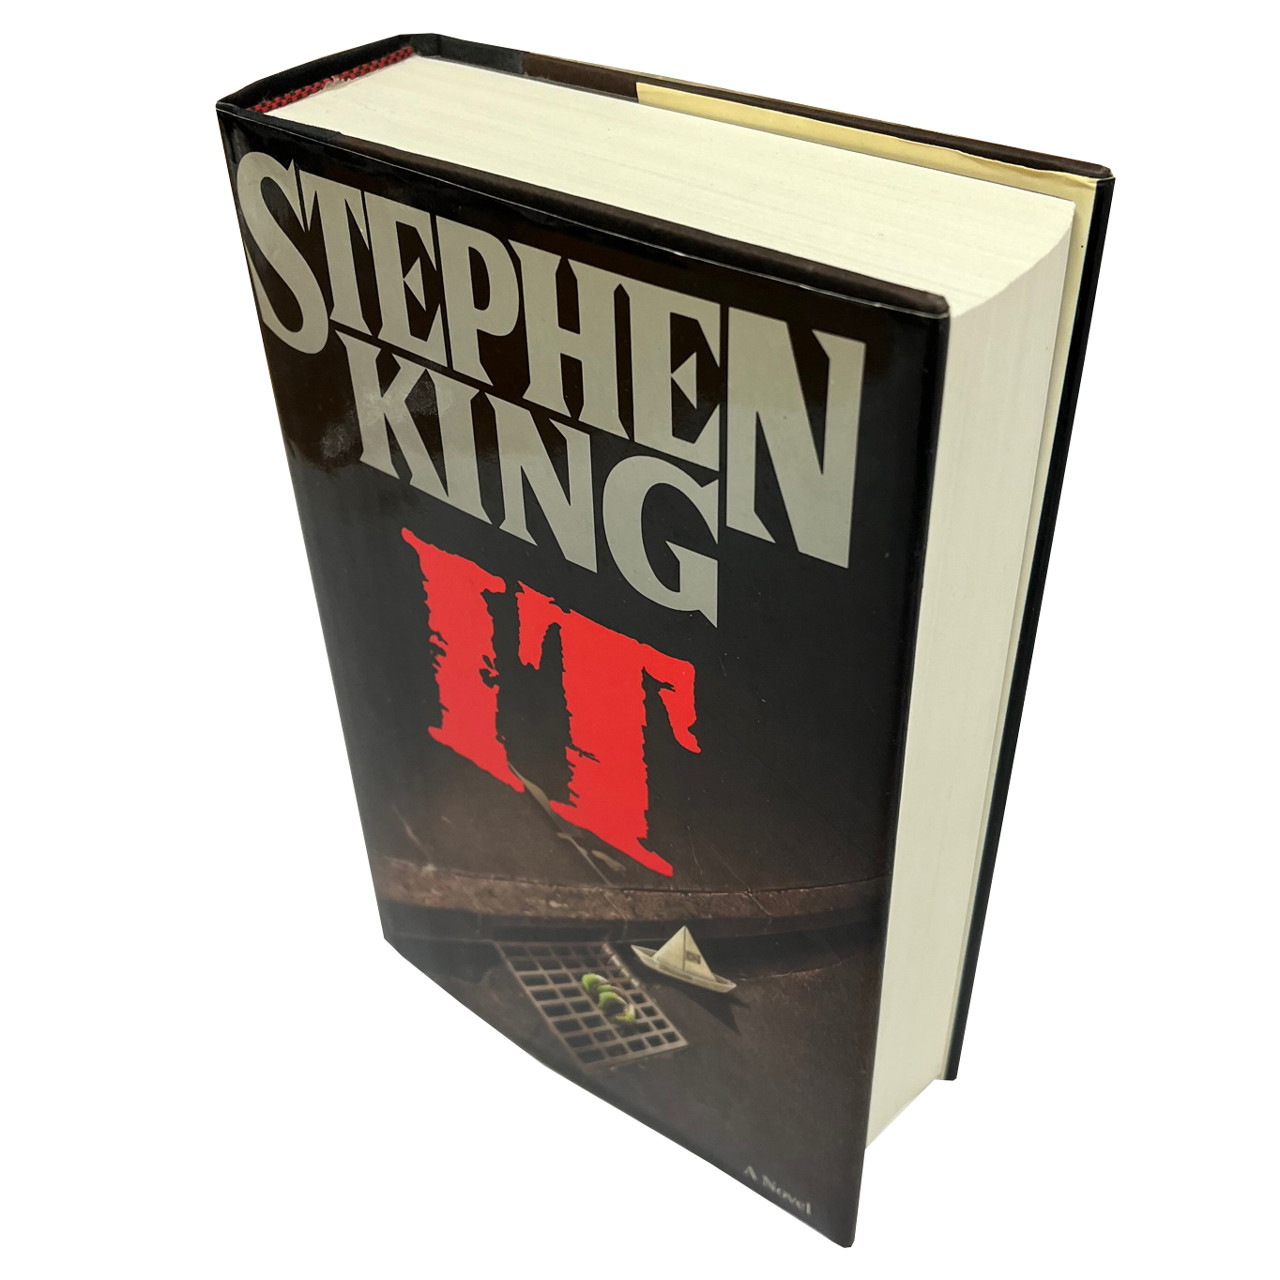 Viking Penguin 1986, Stephen King "IT" US First Edition, First Printing [Fine/NF+]